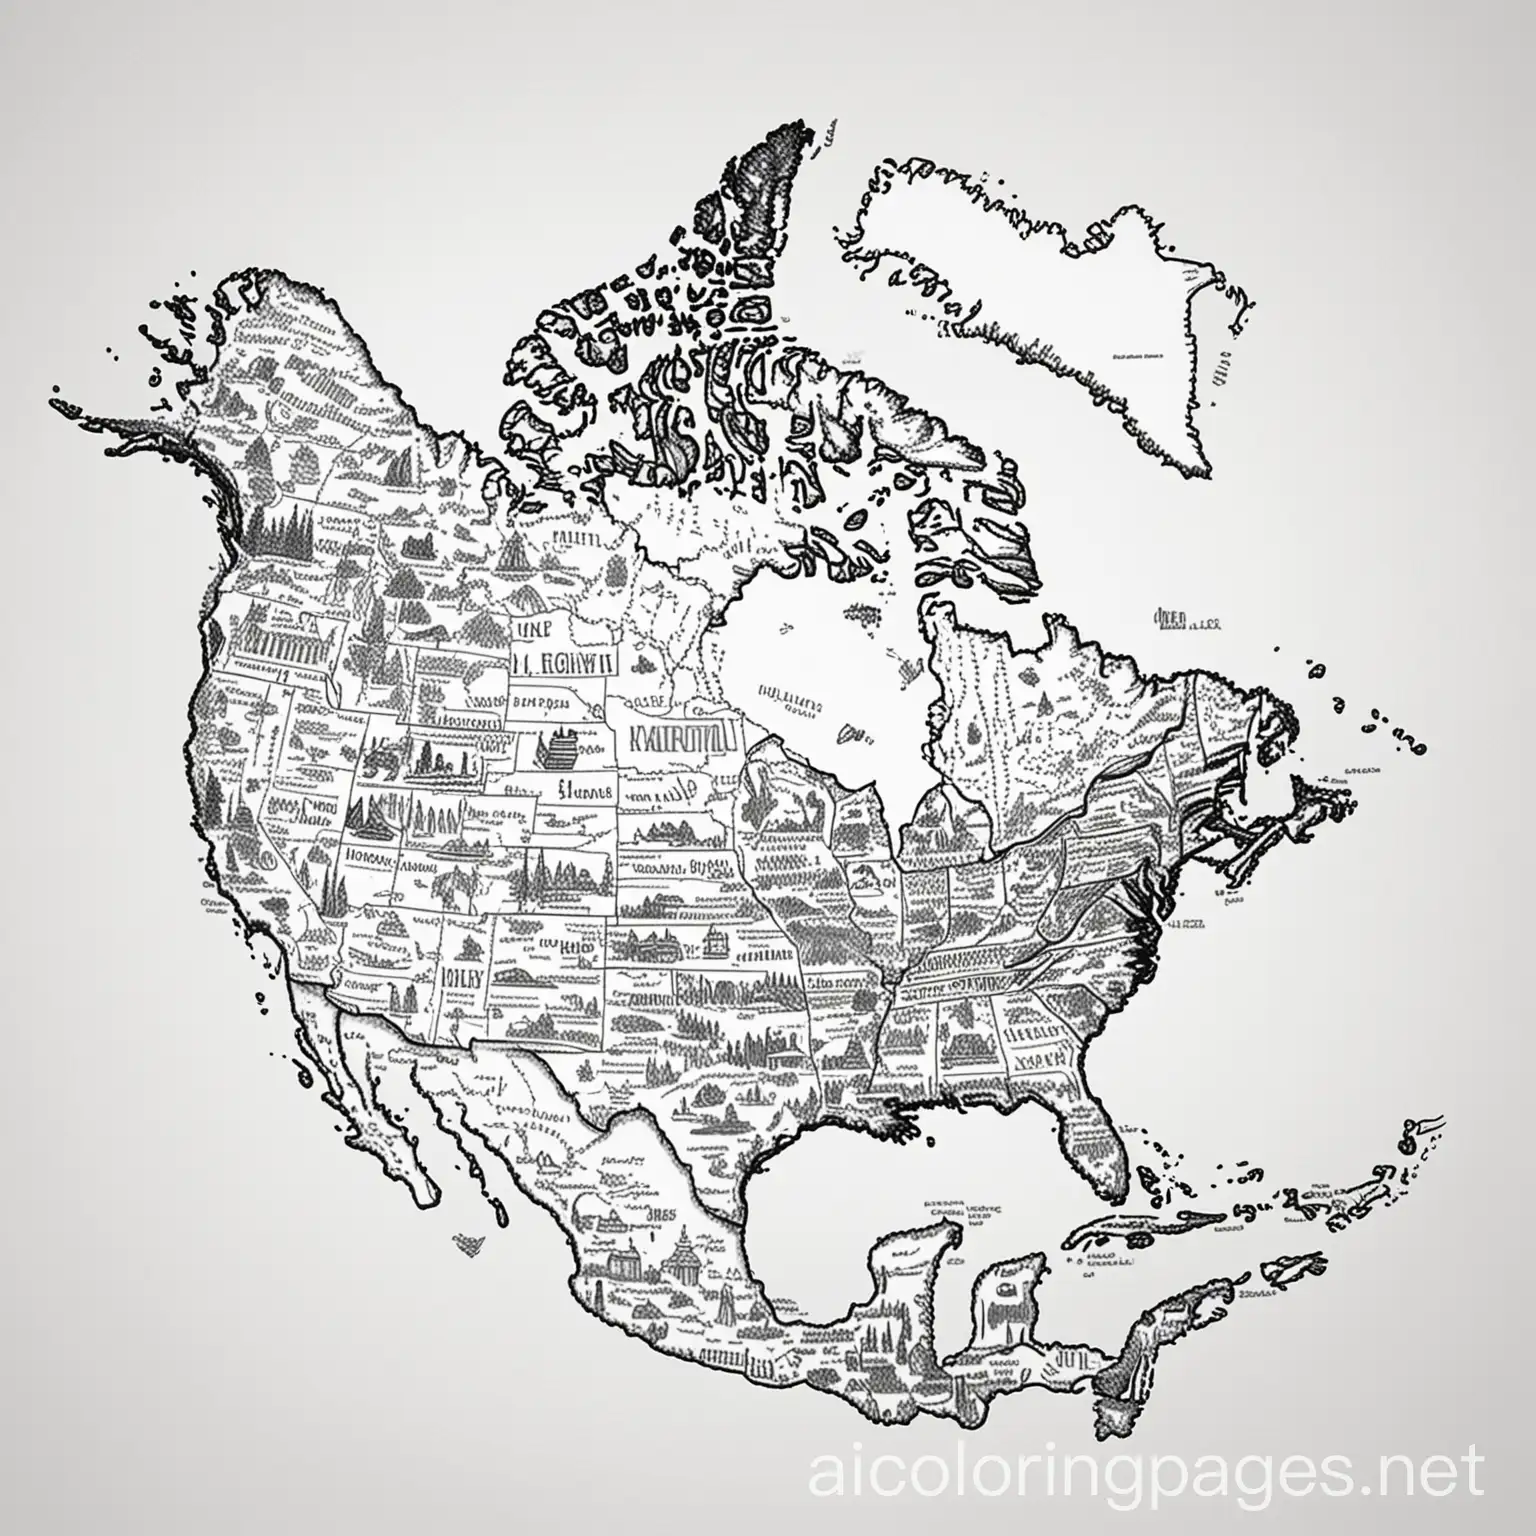 North-America-Landmarks-Coloring-Page-Line-Art-on-White-Background